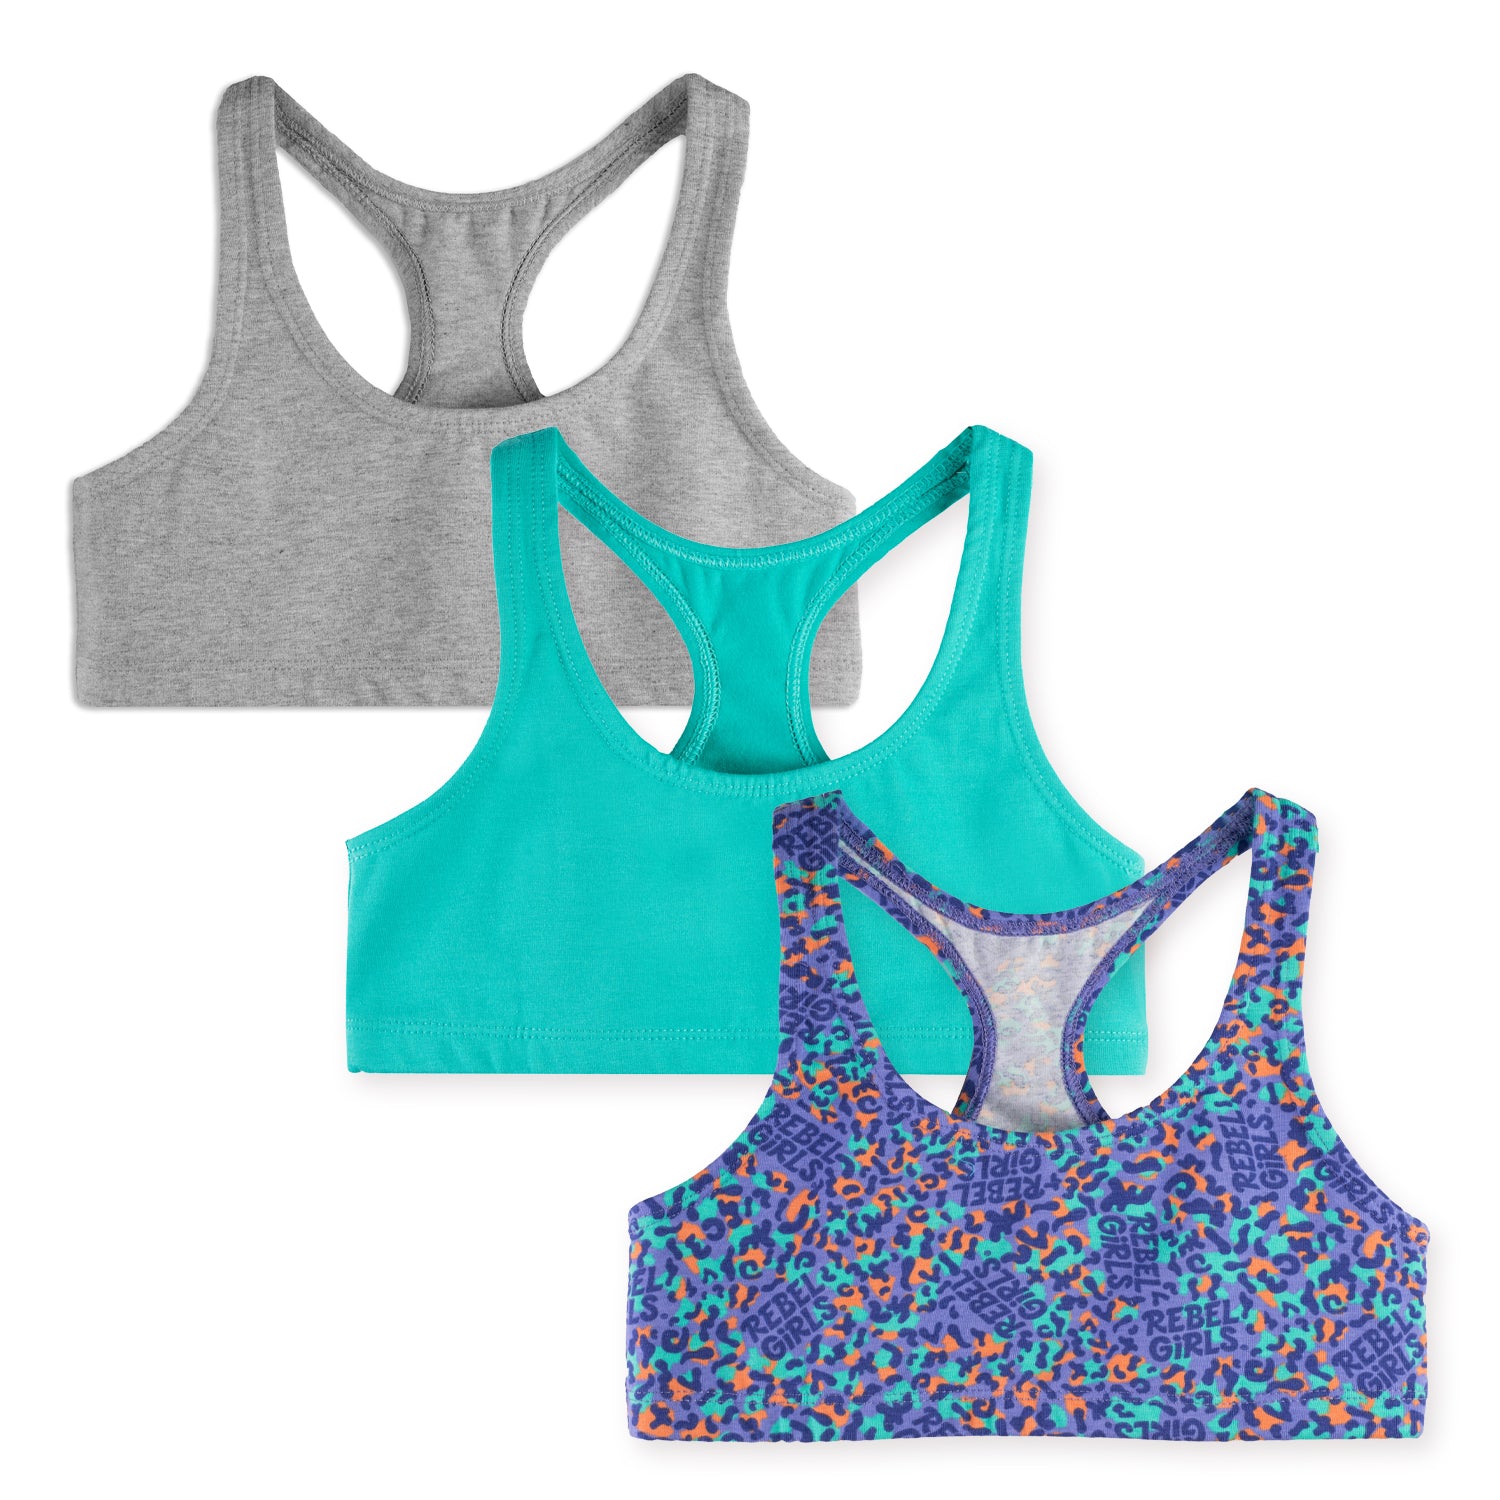 Girls Bras: Organic Cotton Racerback 3 Pack - Mightly